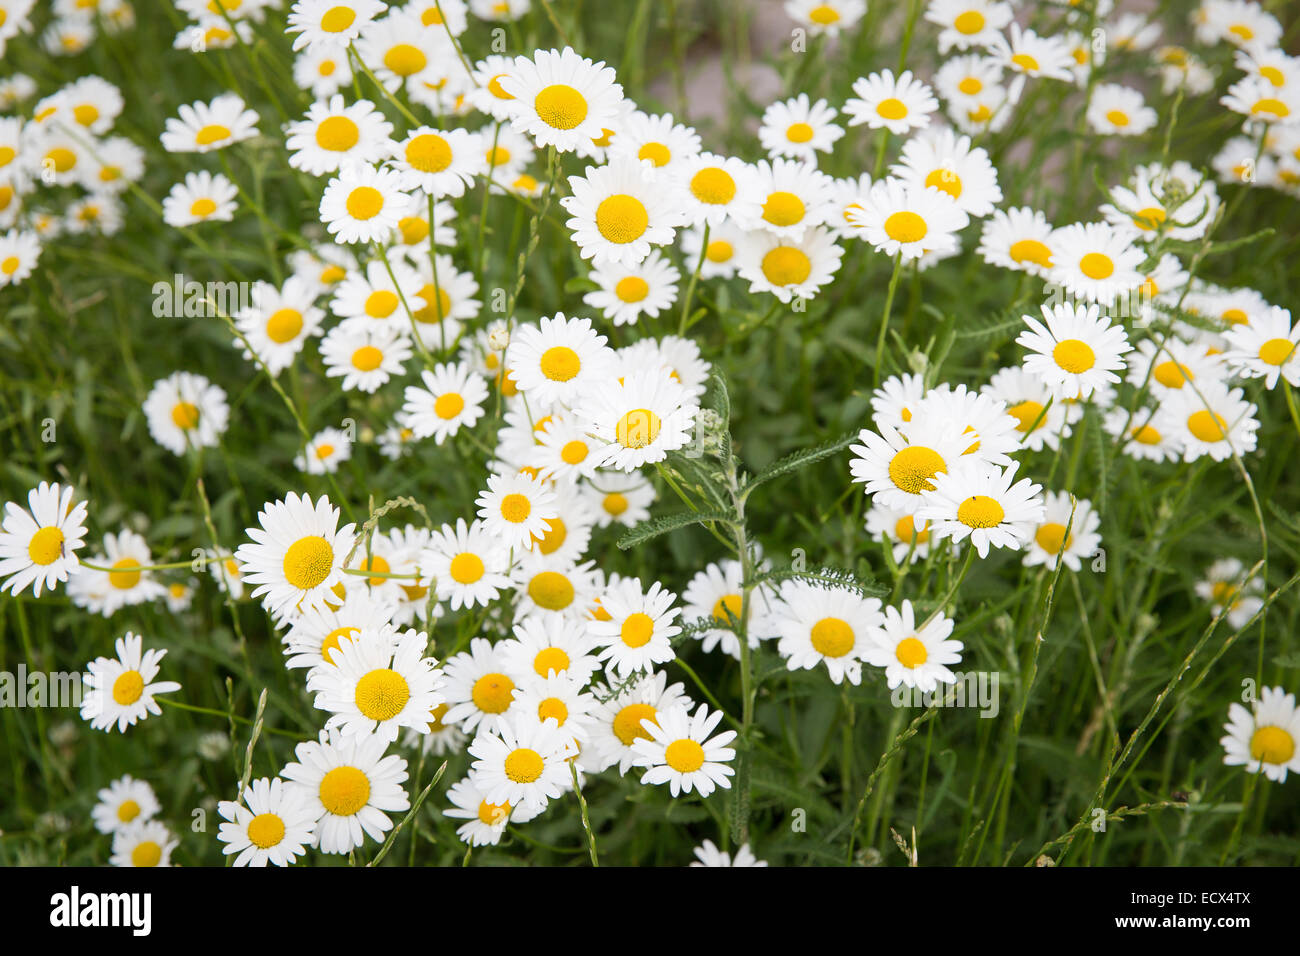 Perfect daisy flower meadow in spring time Stock Photo